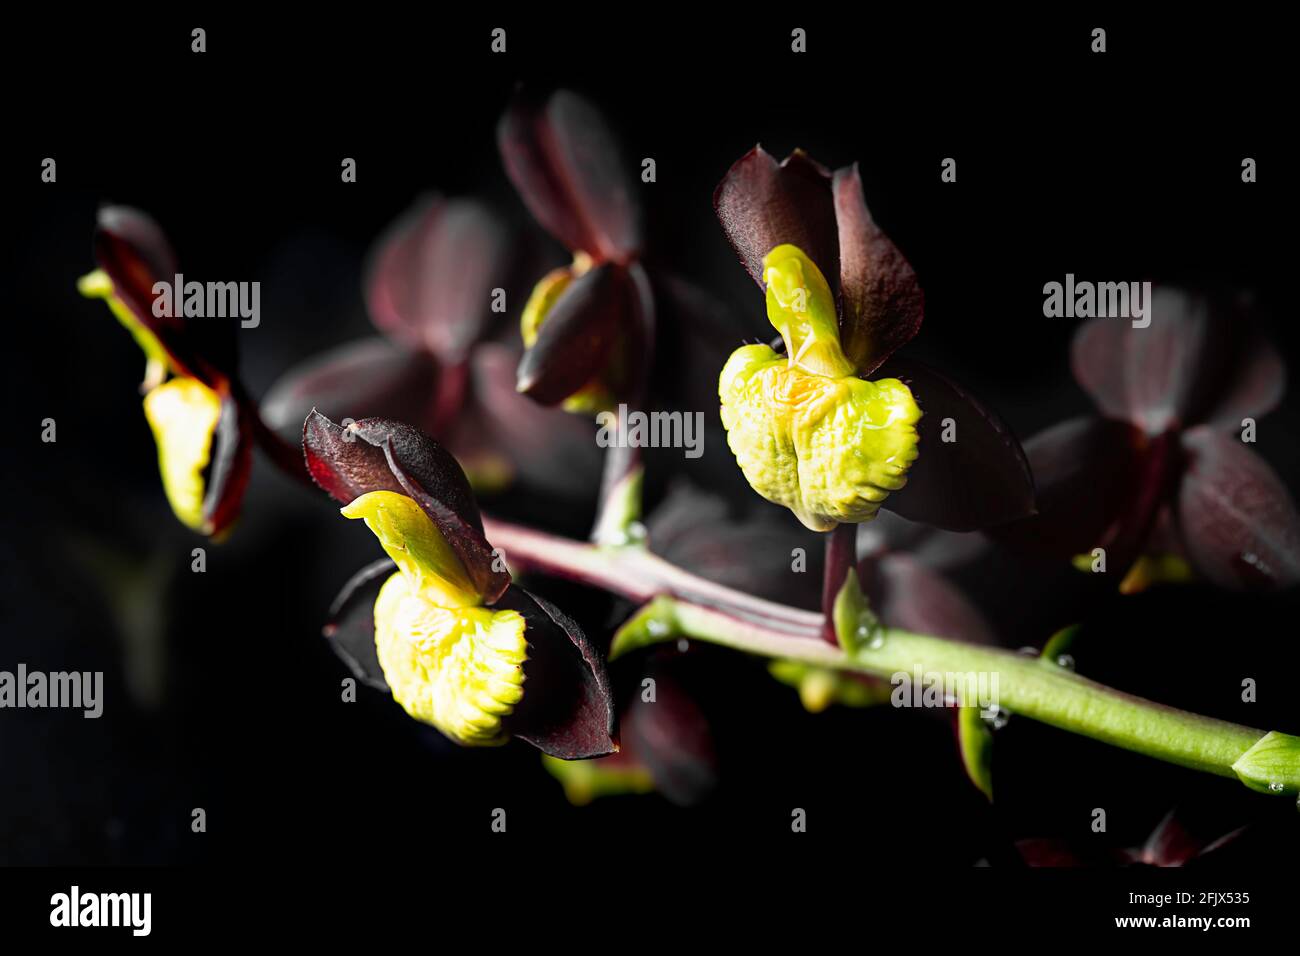 Orchid. Catasetum hybrid on black background. Catasetum tenebrosum. A photo of a stunning almost black orchid hybrid. Selective focus Stock Photo